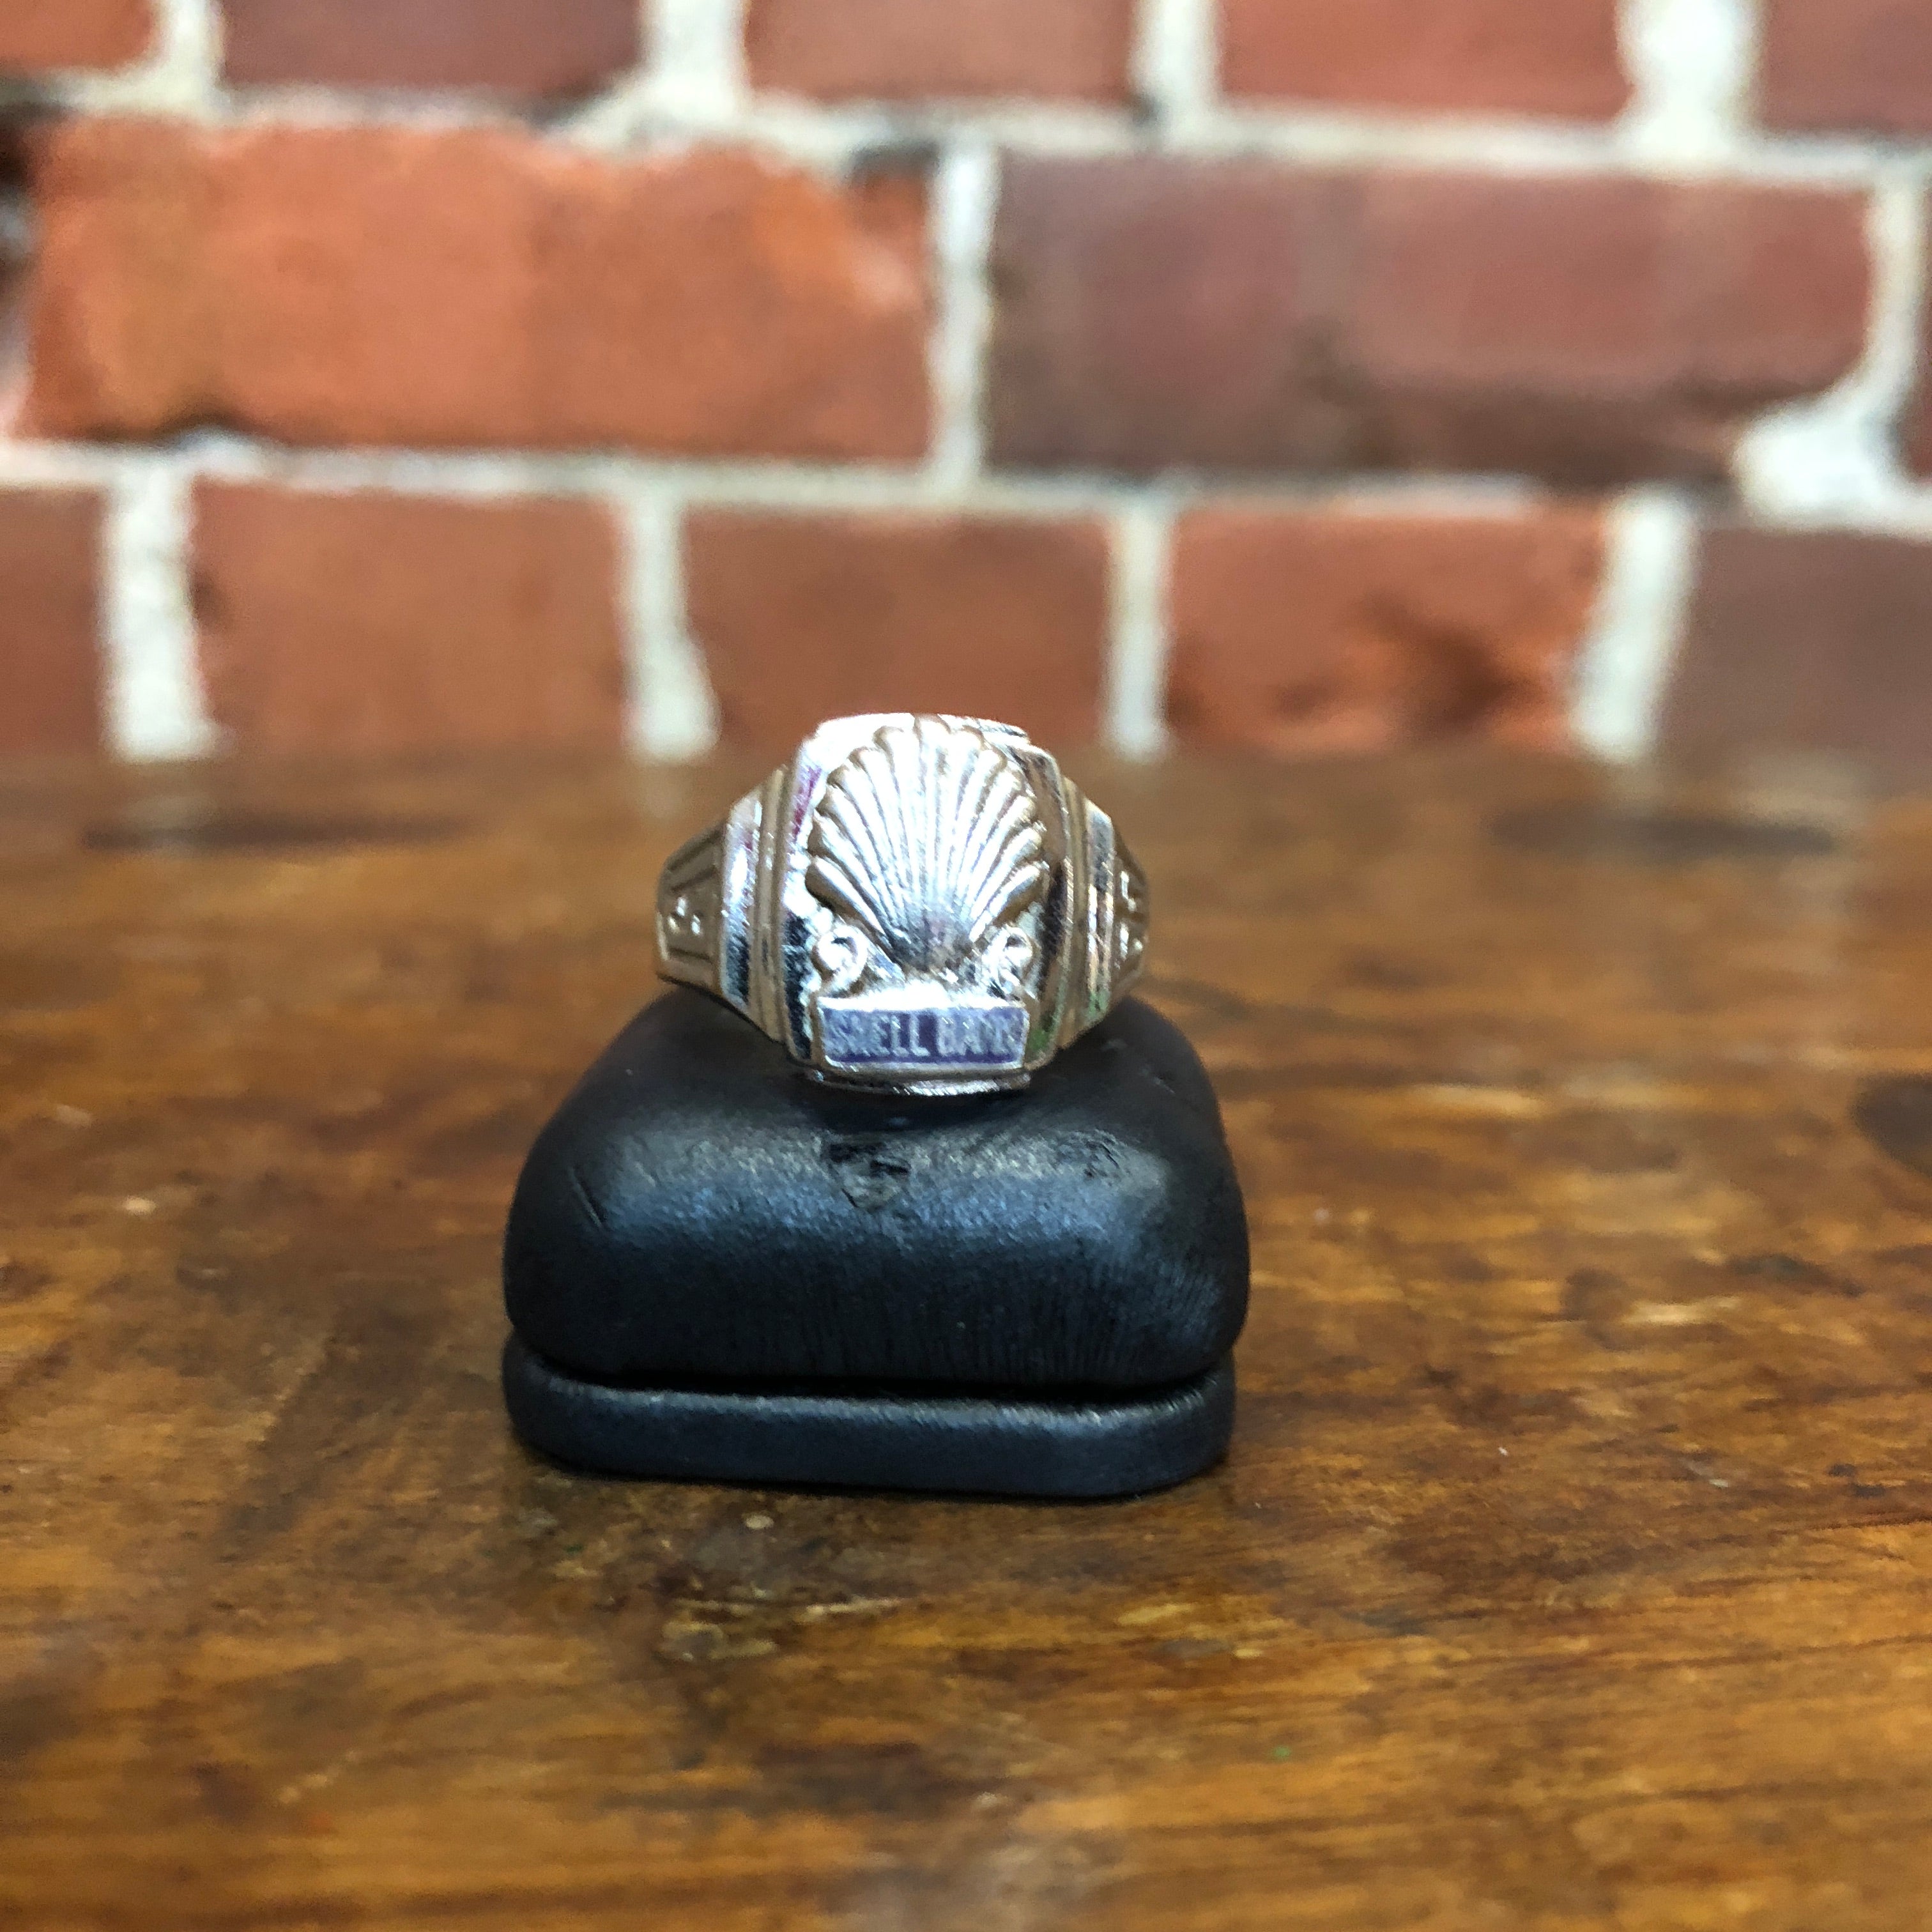 1965 SHELL BANK sterling ring